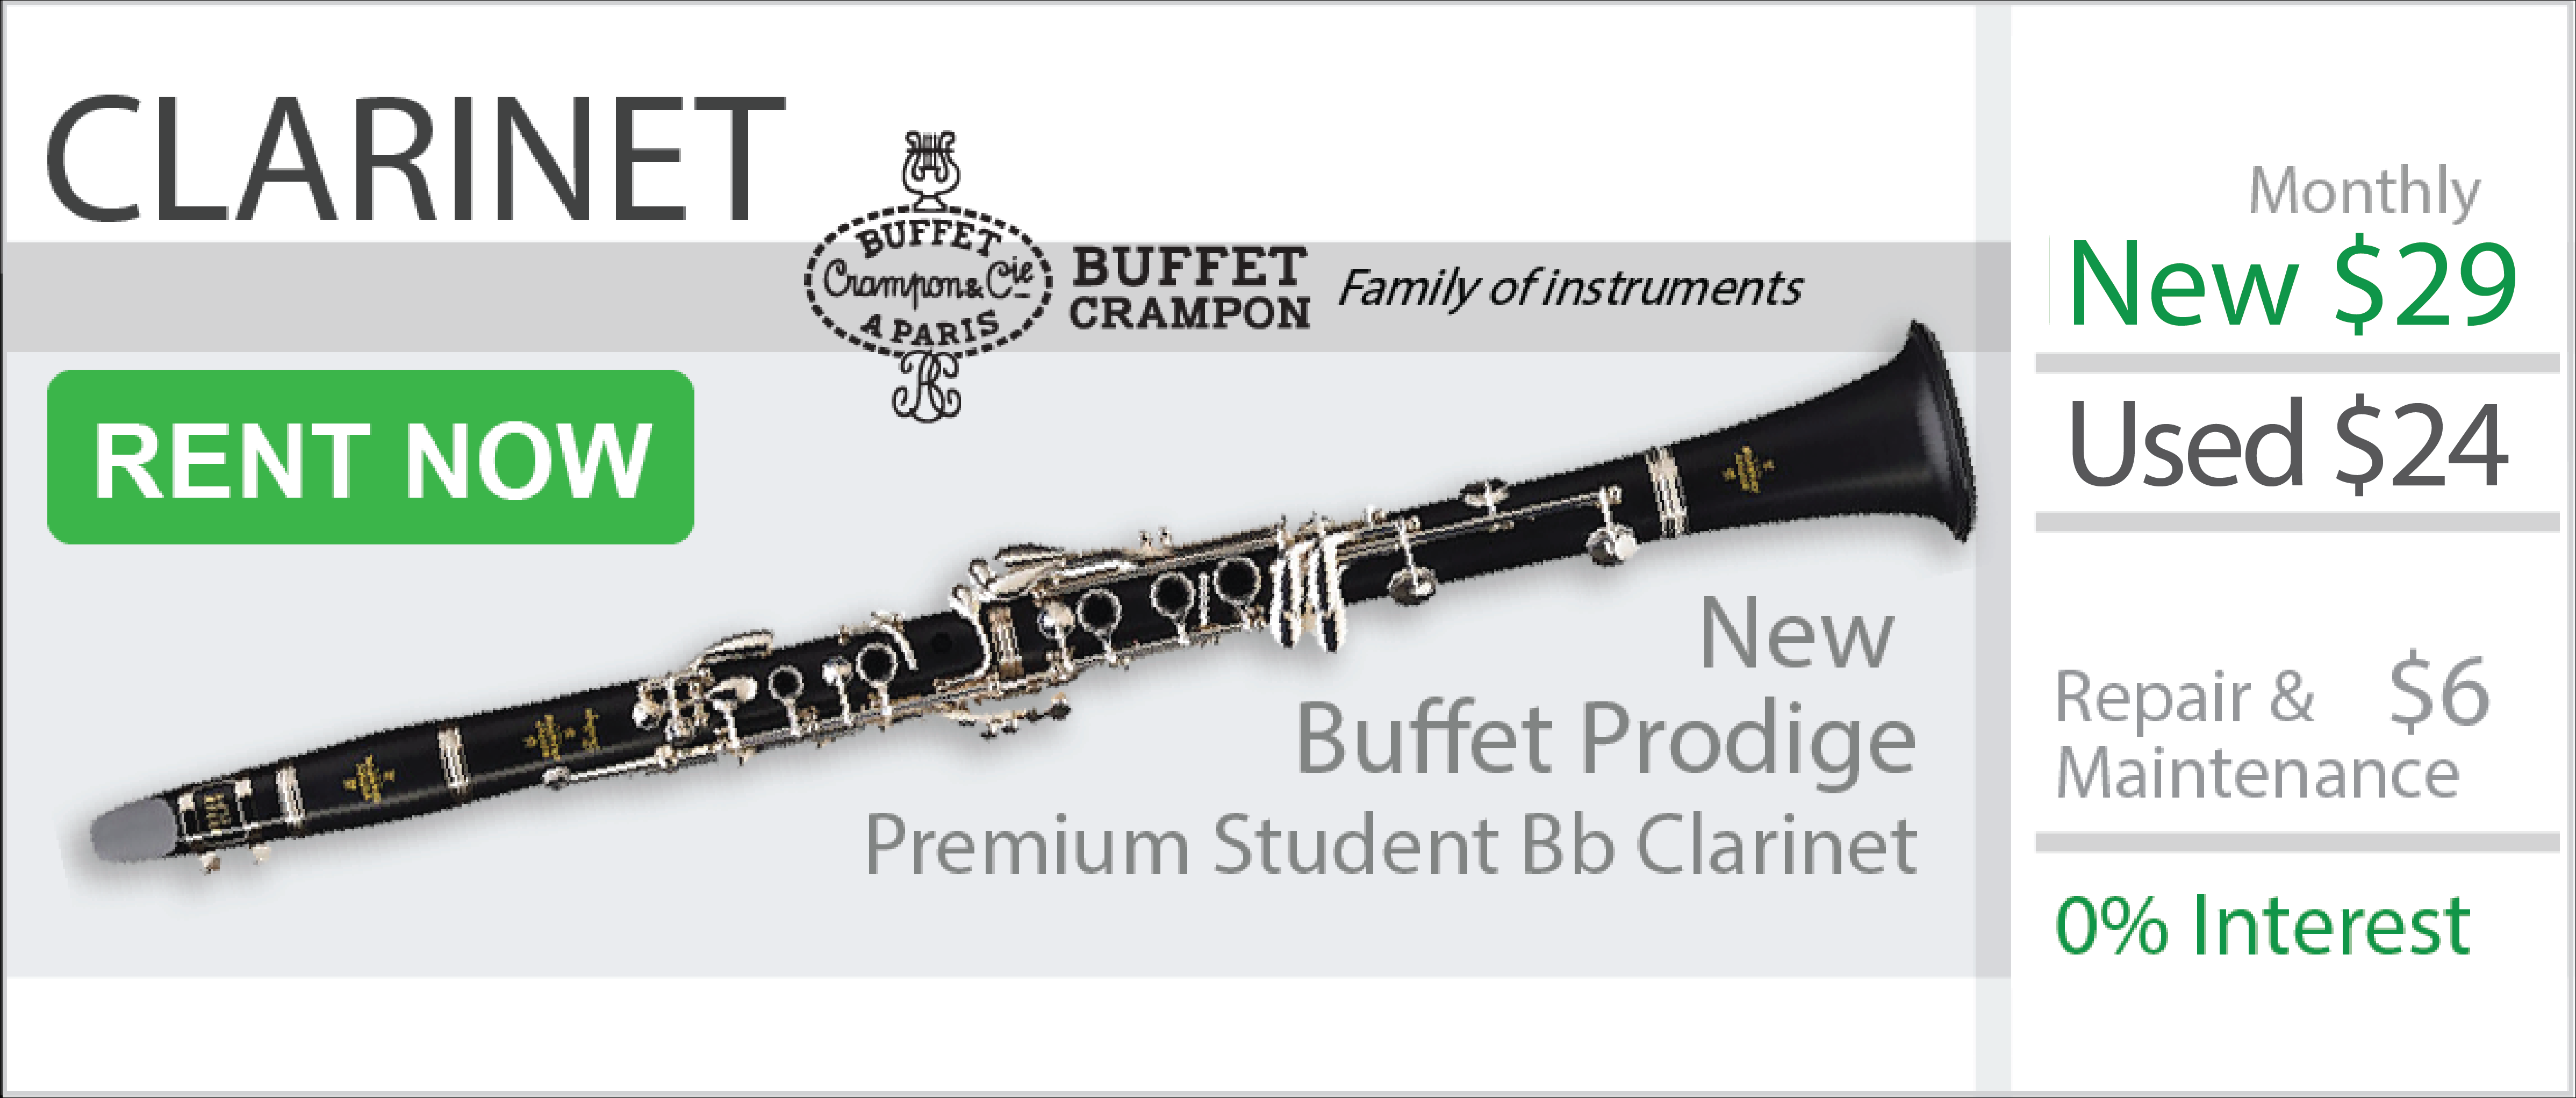 Clarinet Rent to own